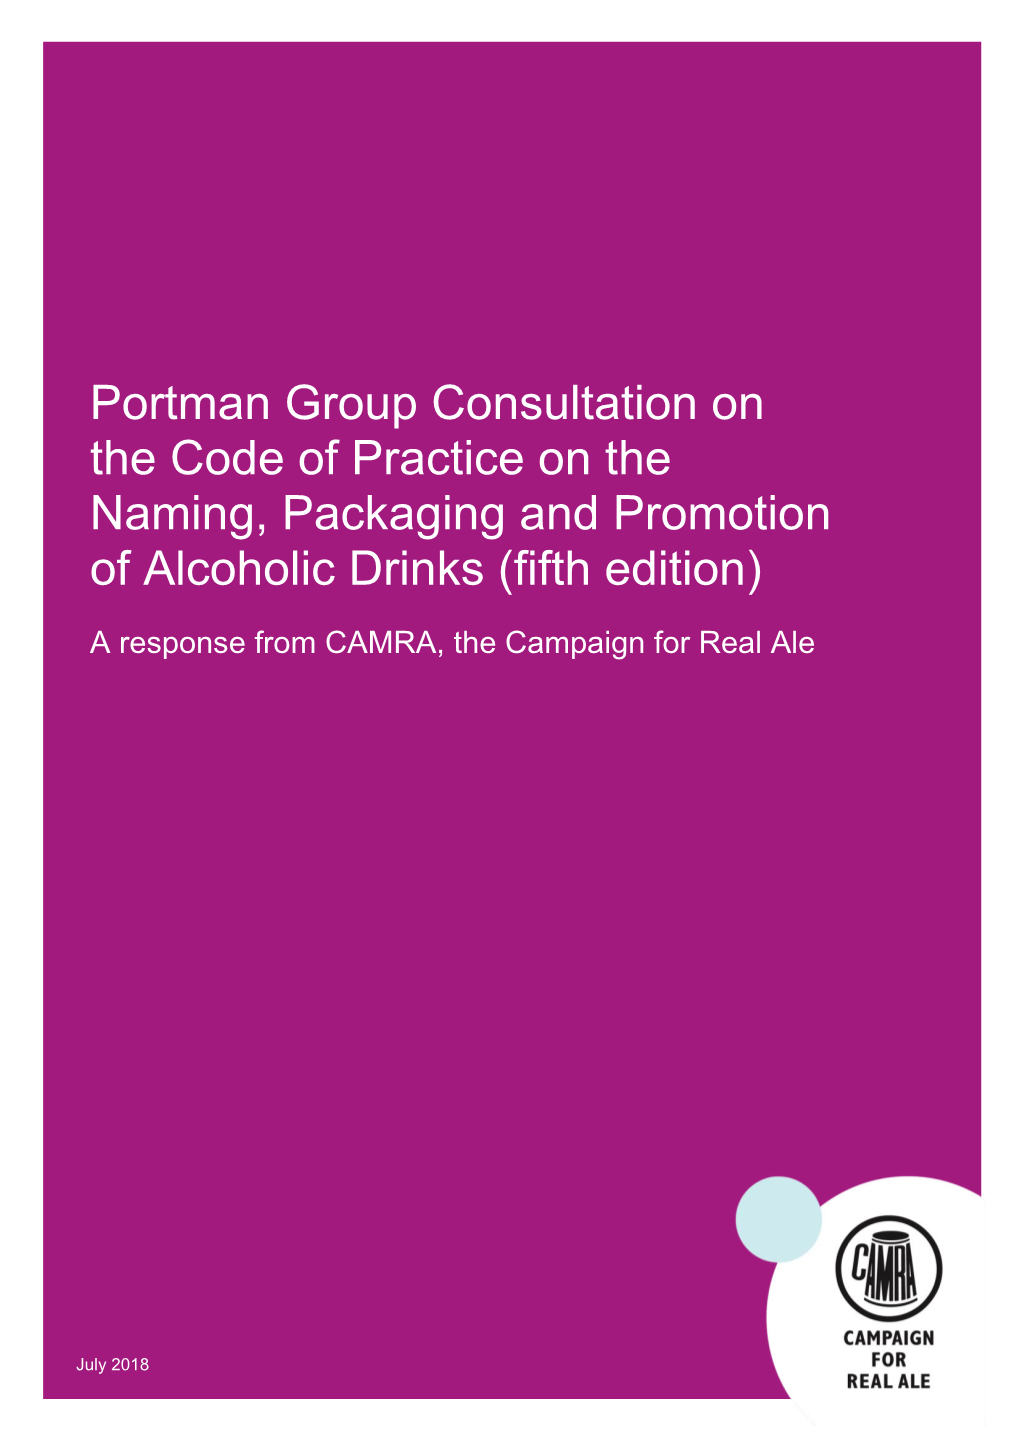 Portman Group Consultation on the Code of Practice on the Naming, Packaging and Promotion of Alcoholic Drinks (Fifth Edition)